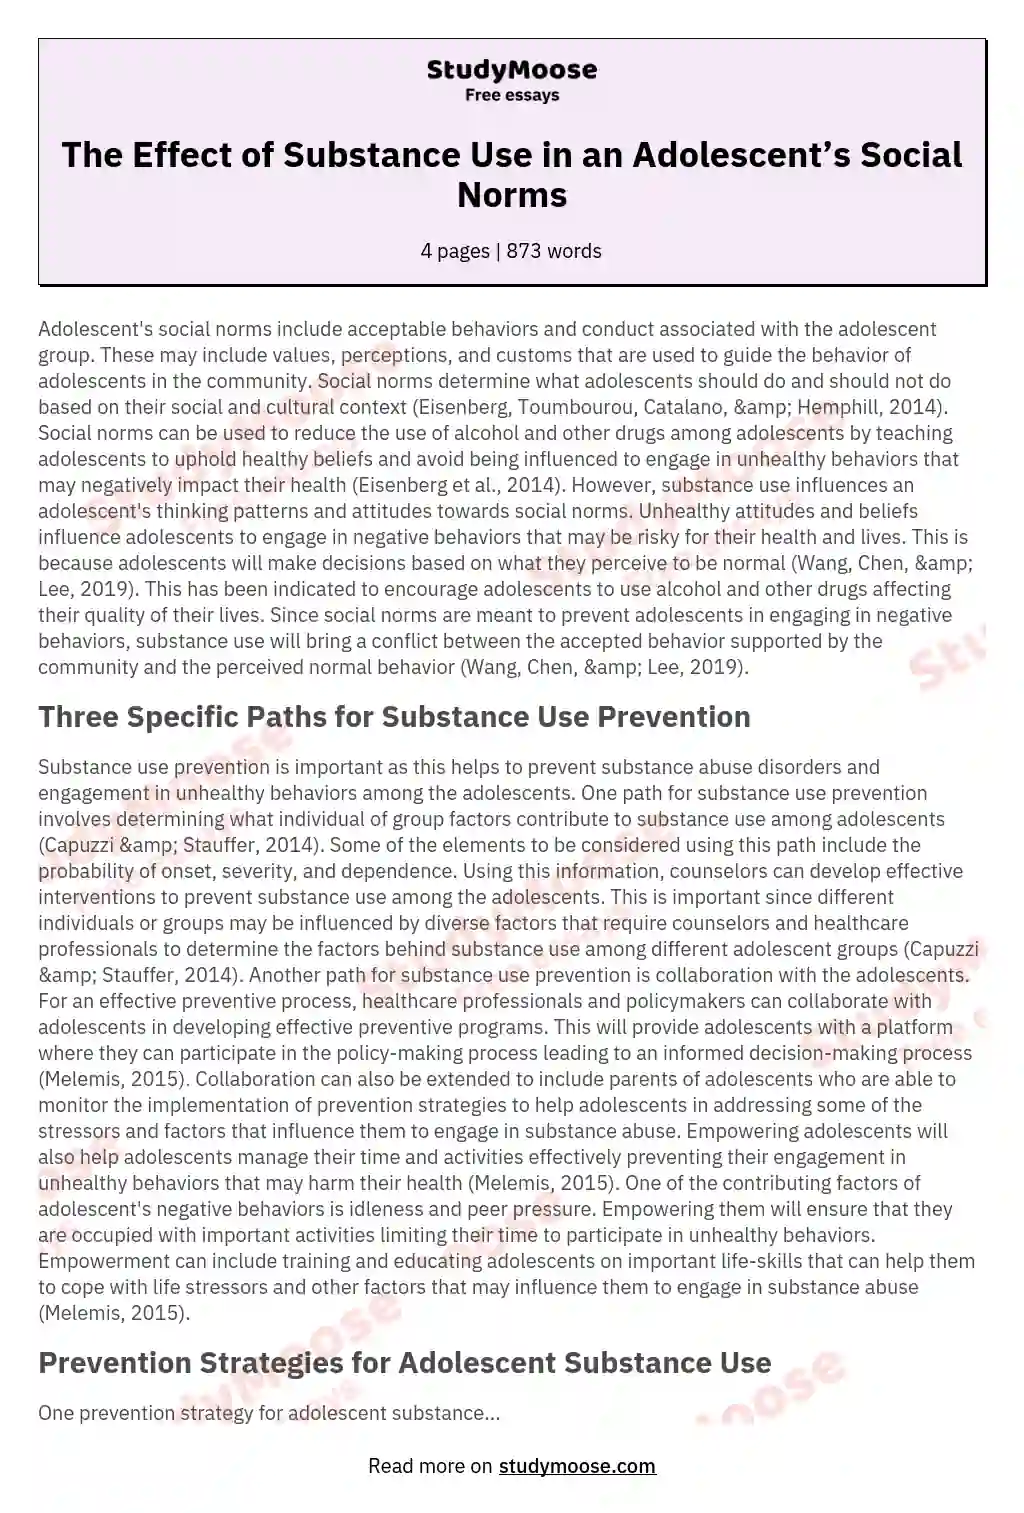 The Effect of Substance Use in an Adolescent’s Social Norms essay